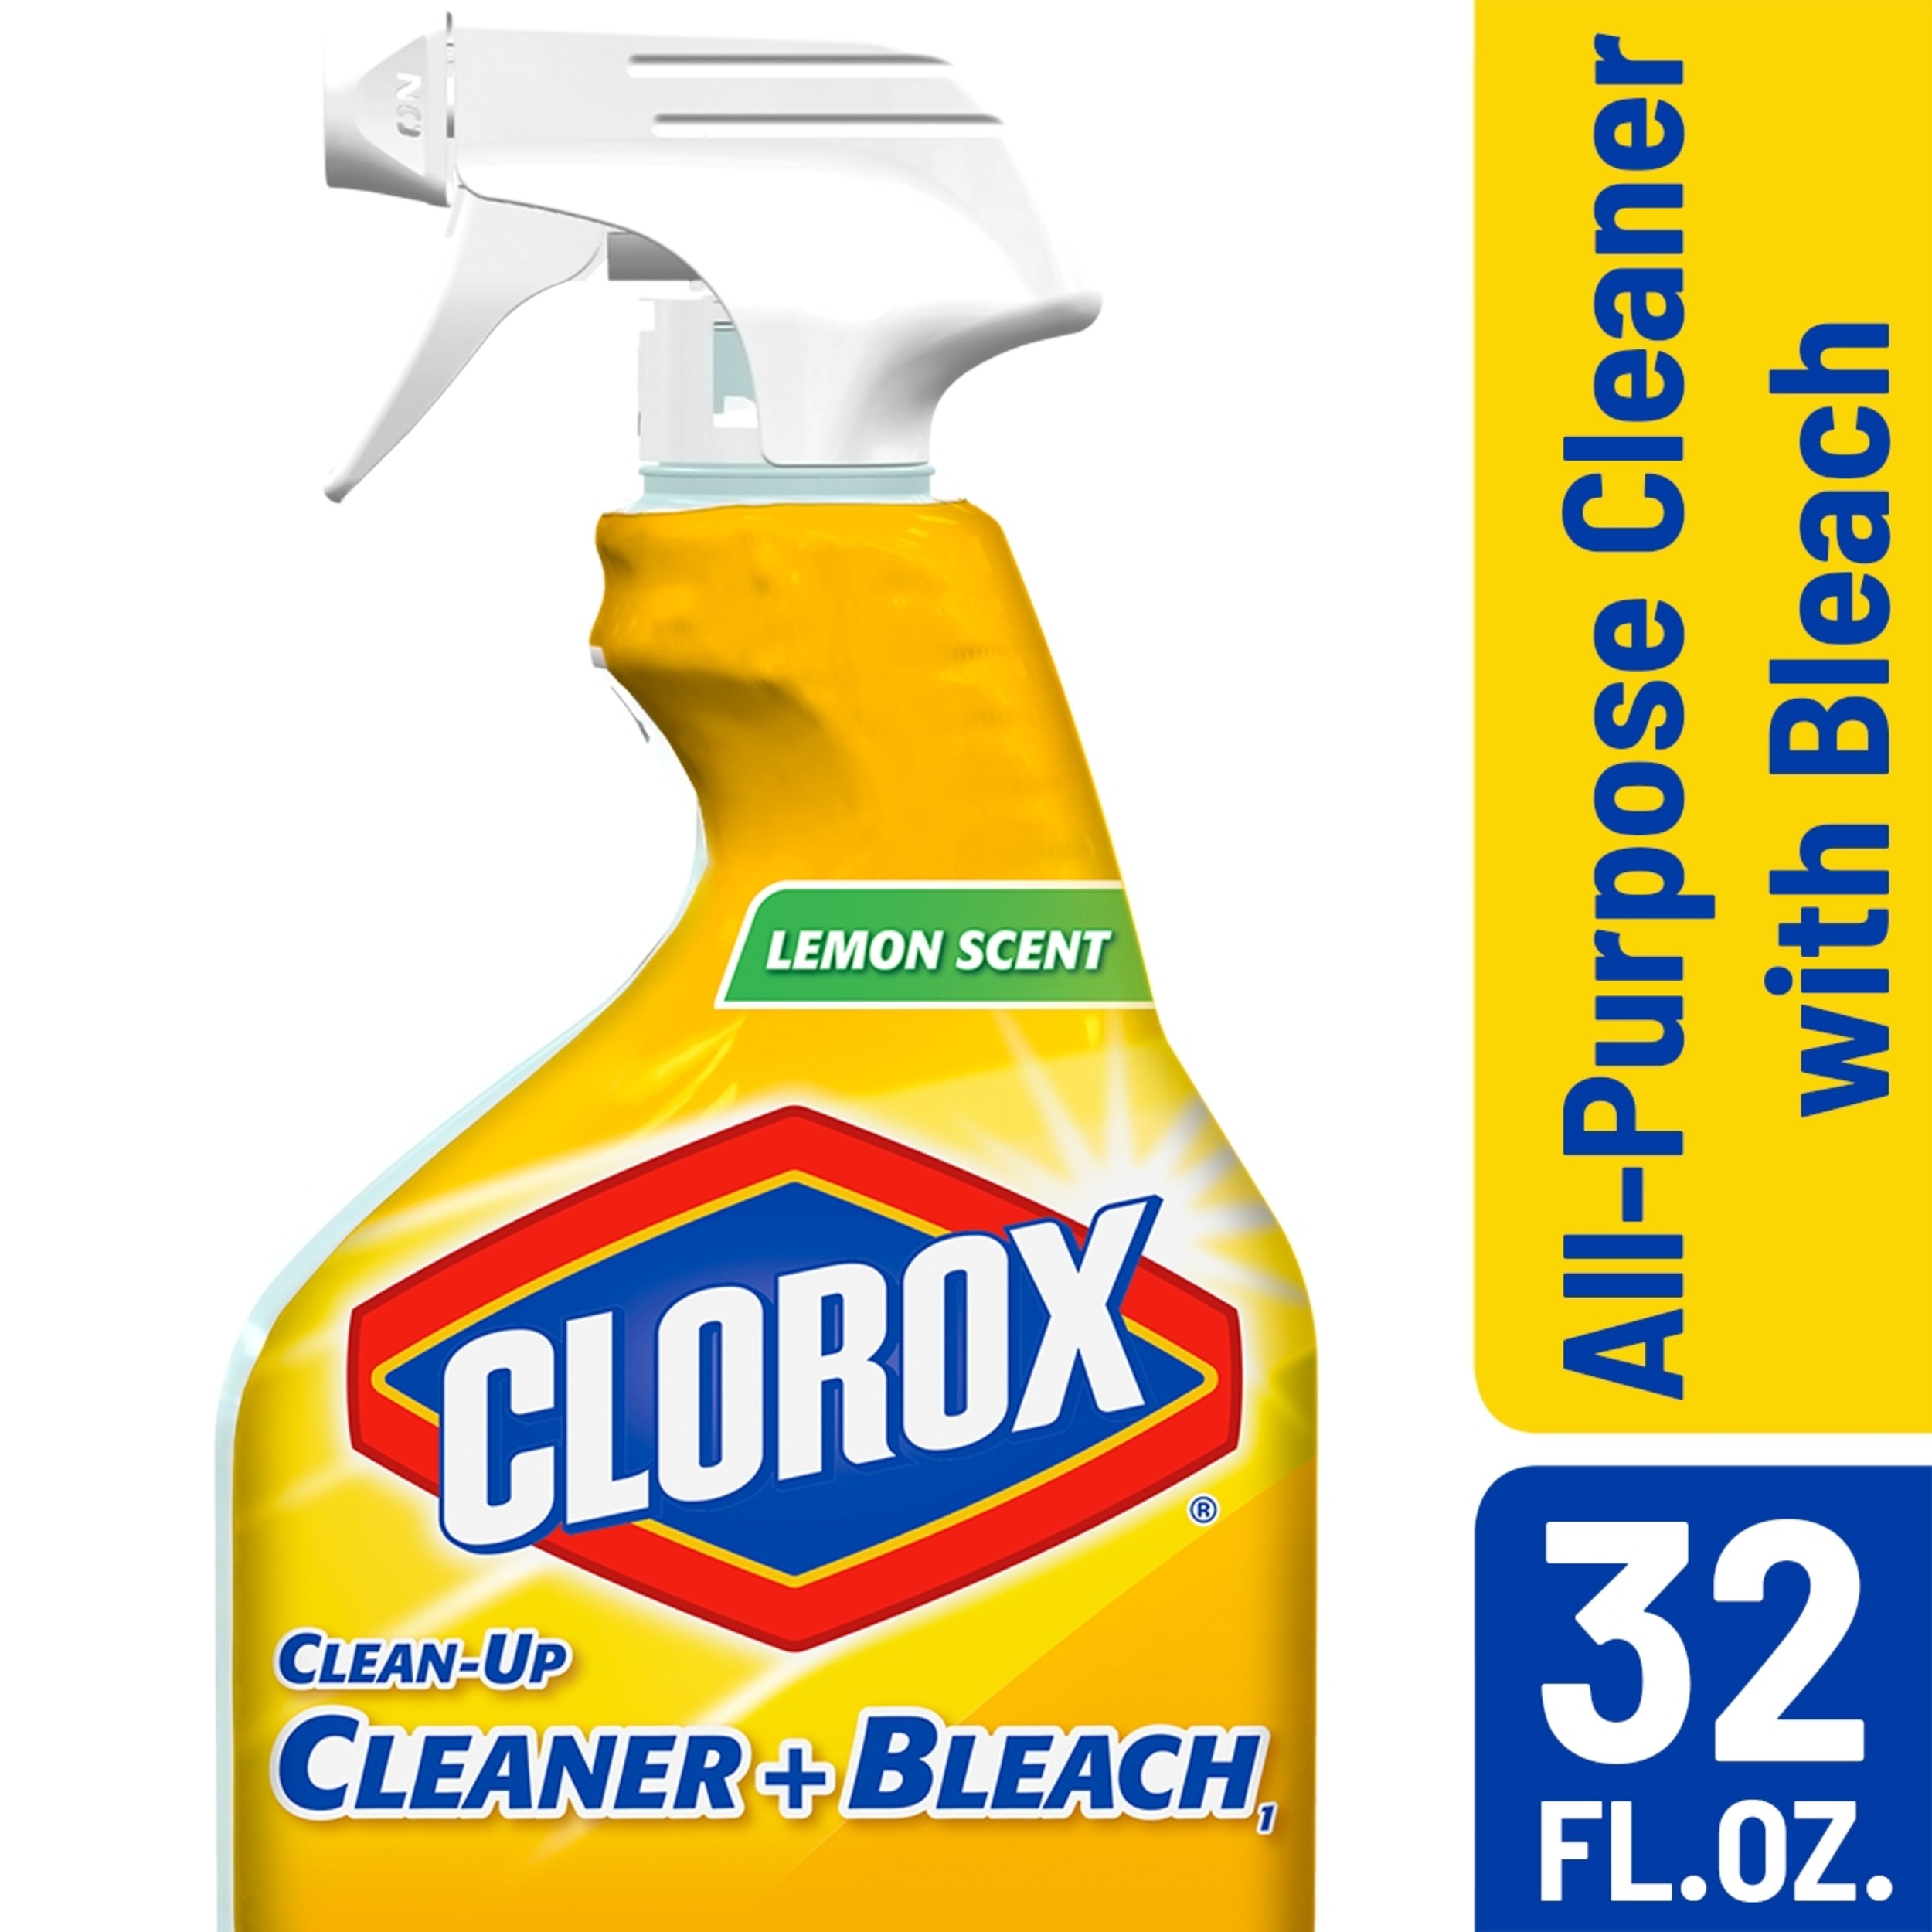 Clorox Clean-Up All Purpose Cleaner with Bleach, Spray Bottle, Lemon Scent, 32 oz - image 1 of 10